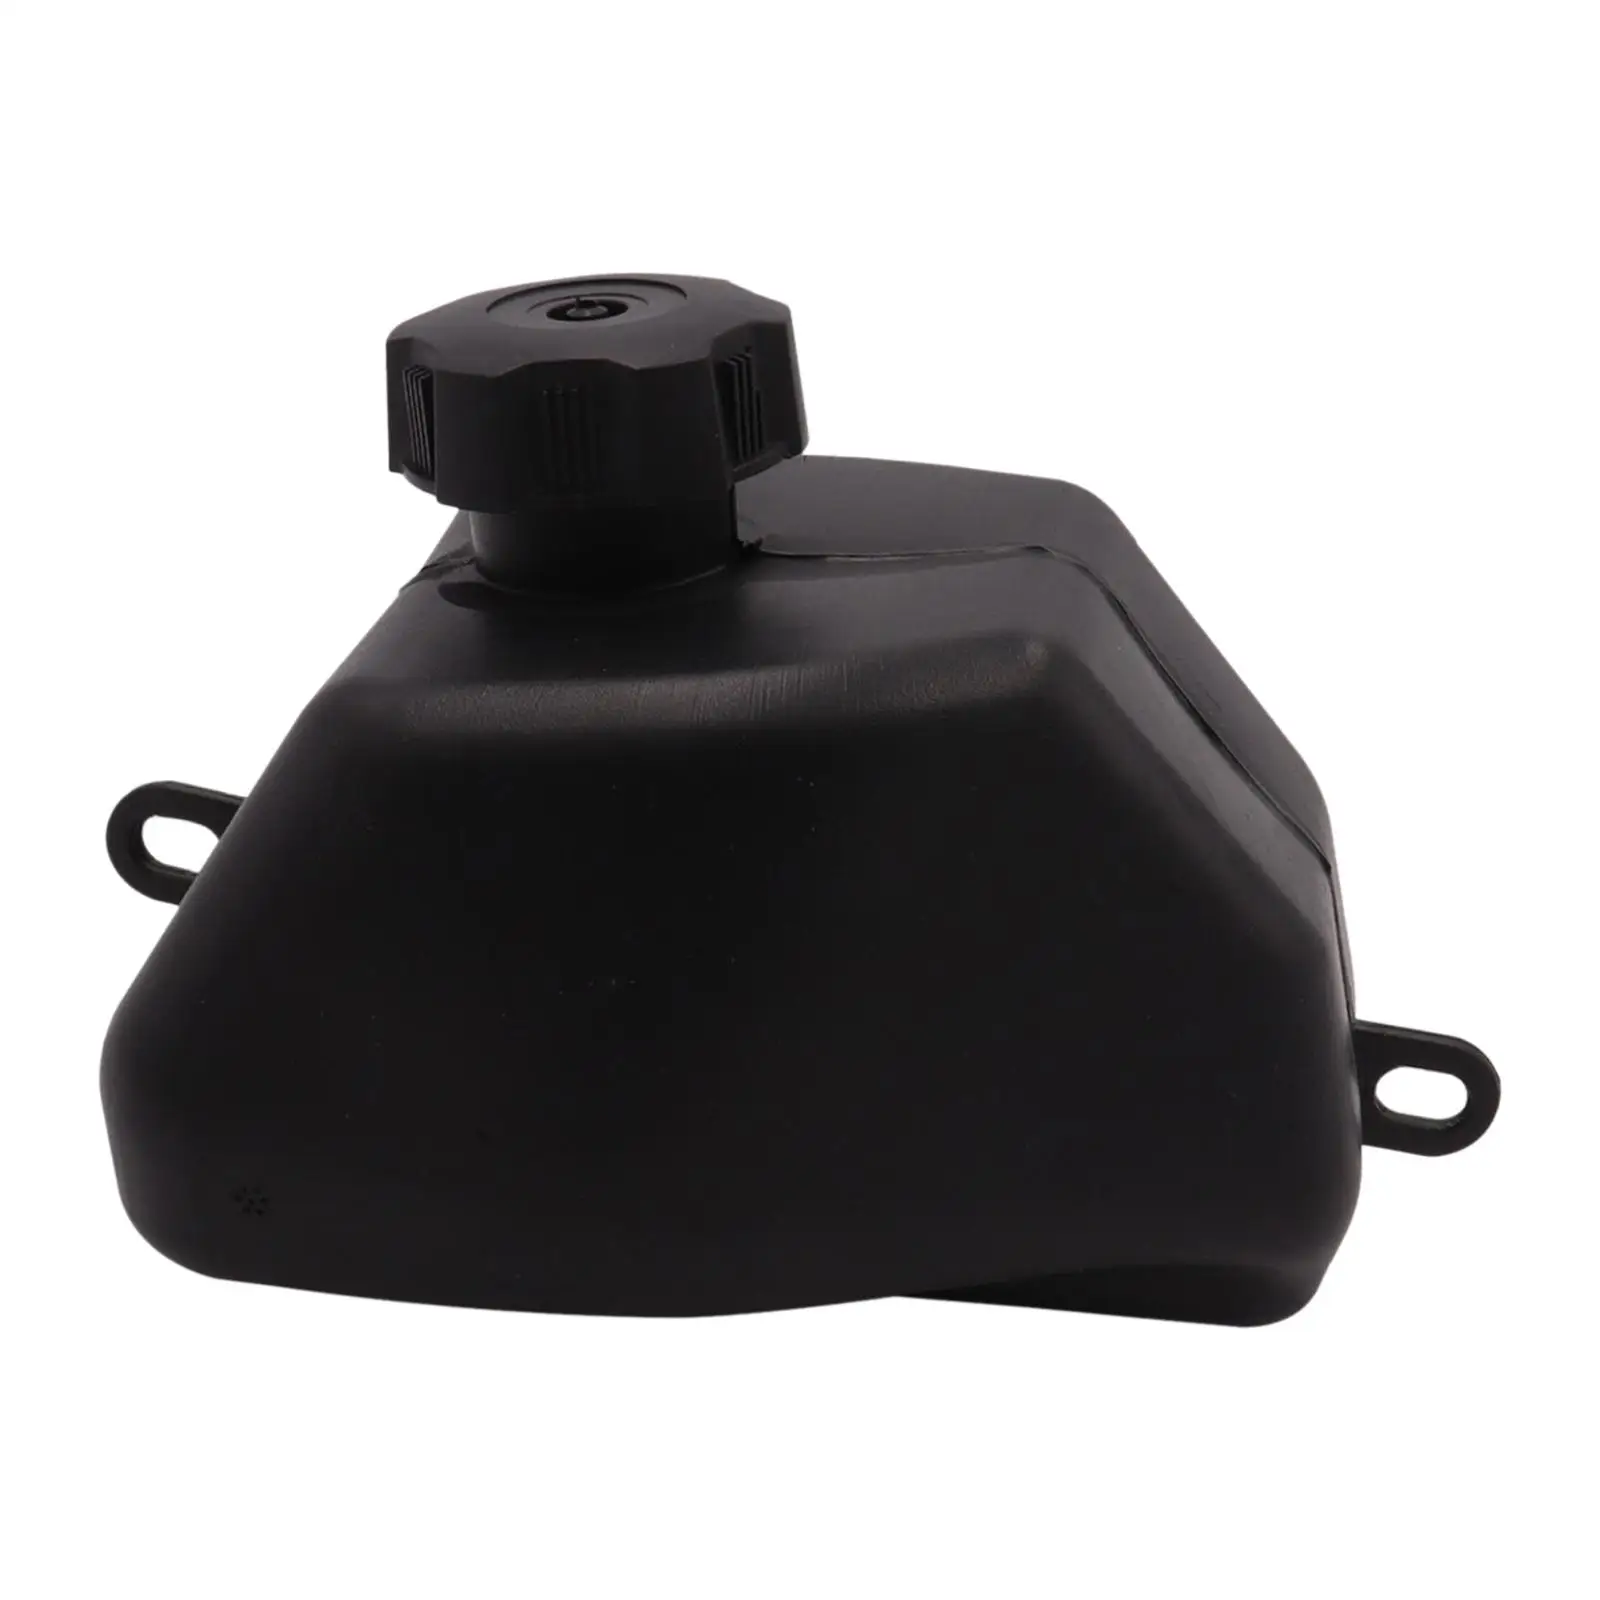 1 Piece Gas Fuel Tank Plastic Replacement Accs W/ Cover Durable Petrol Fits for ATV Motocross Motorcycle Quad Dirt Bike Buggy